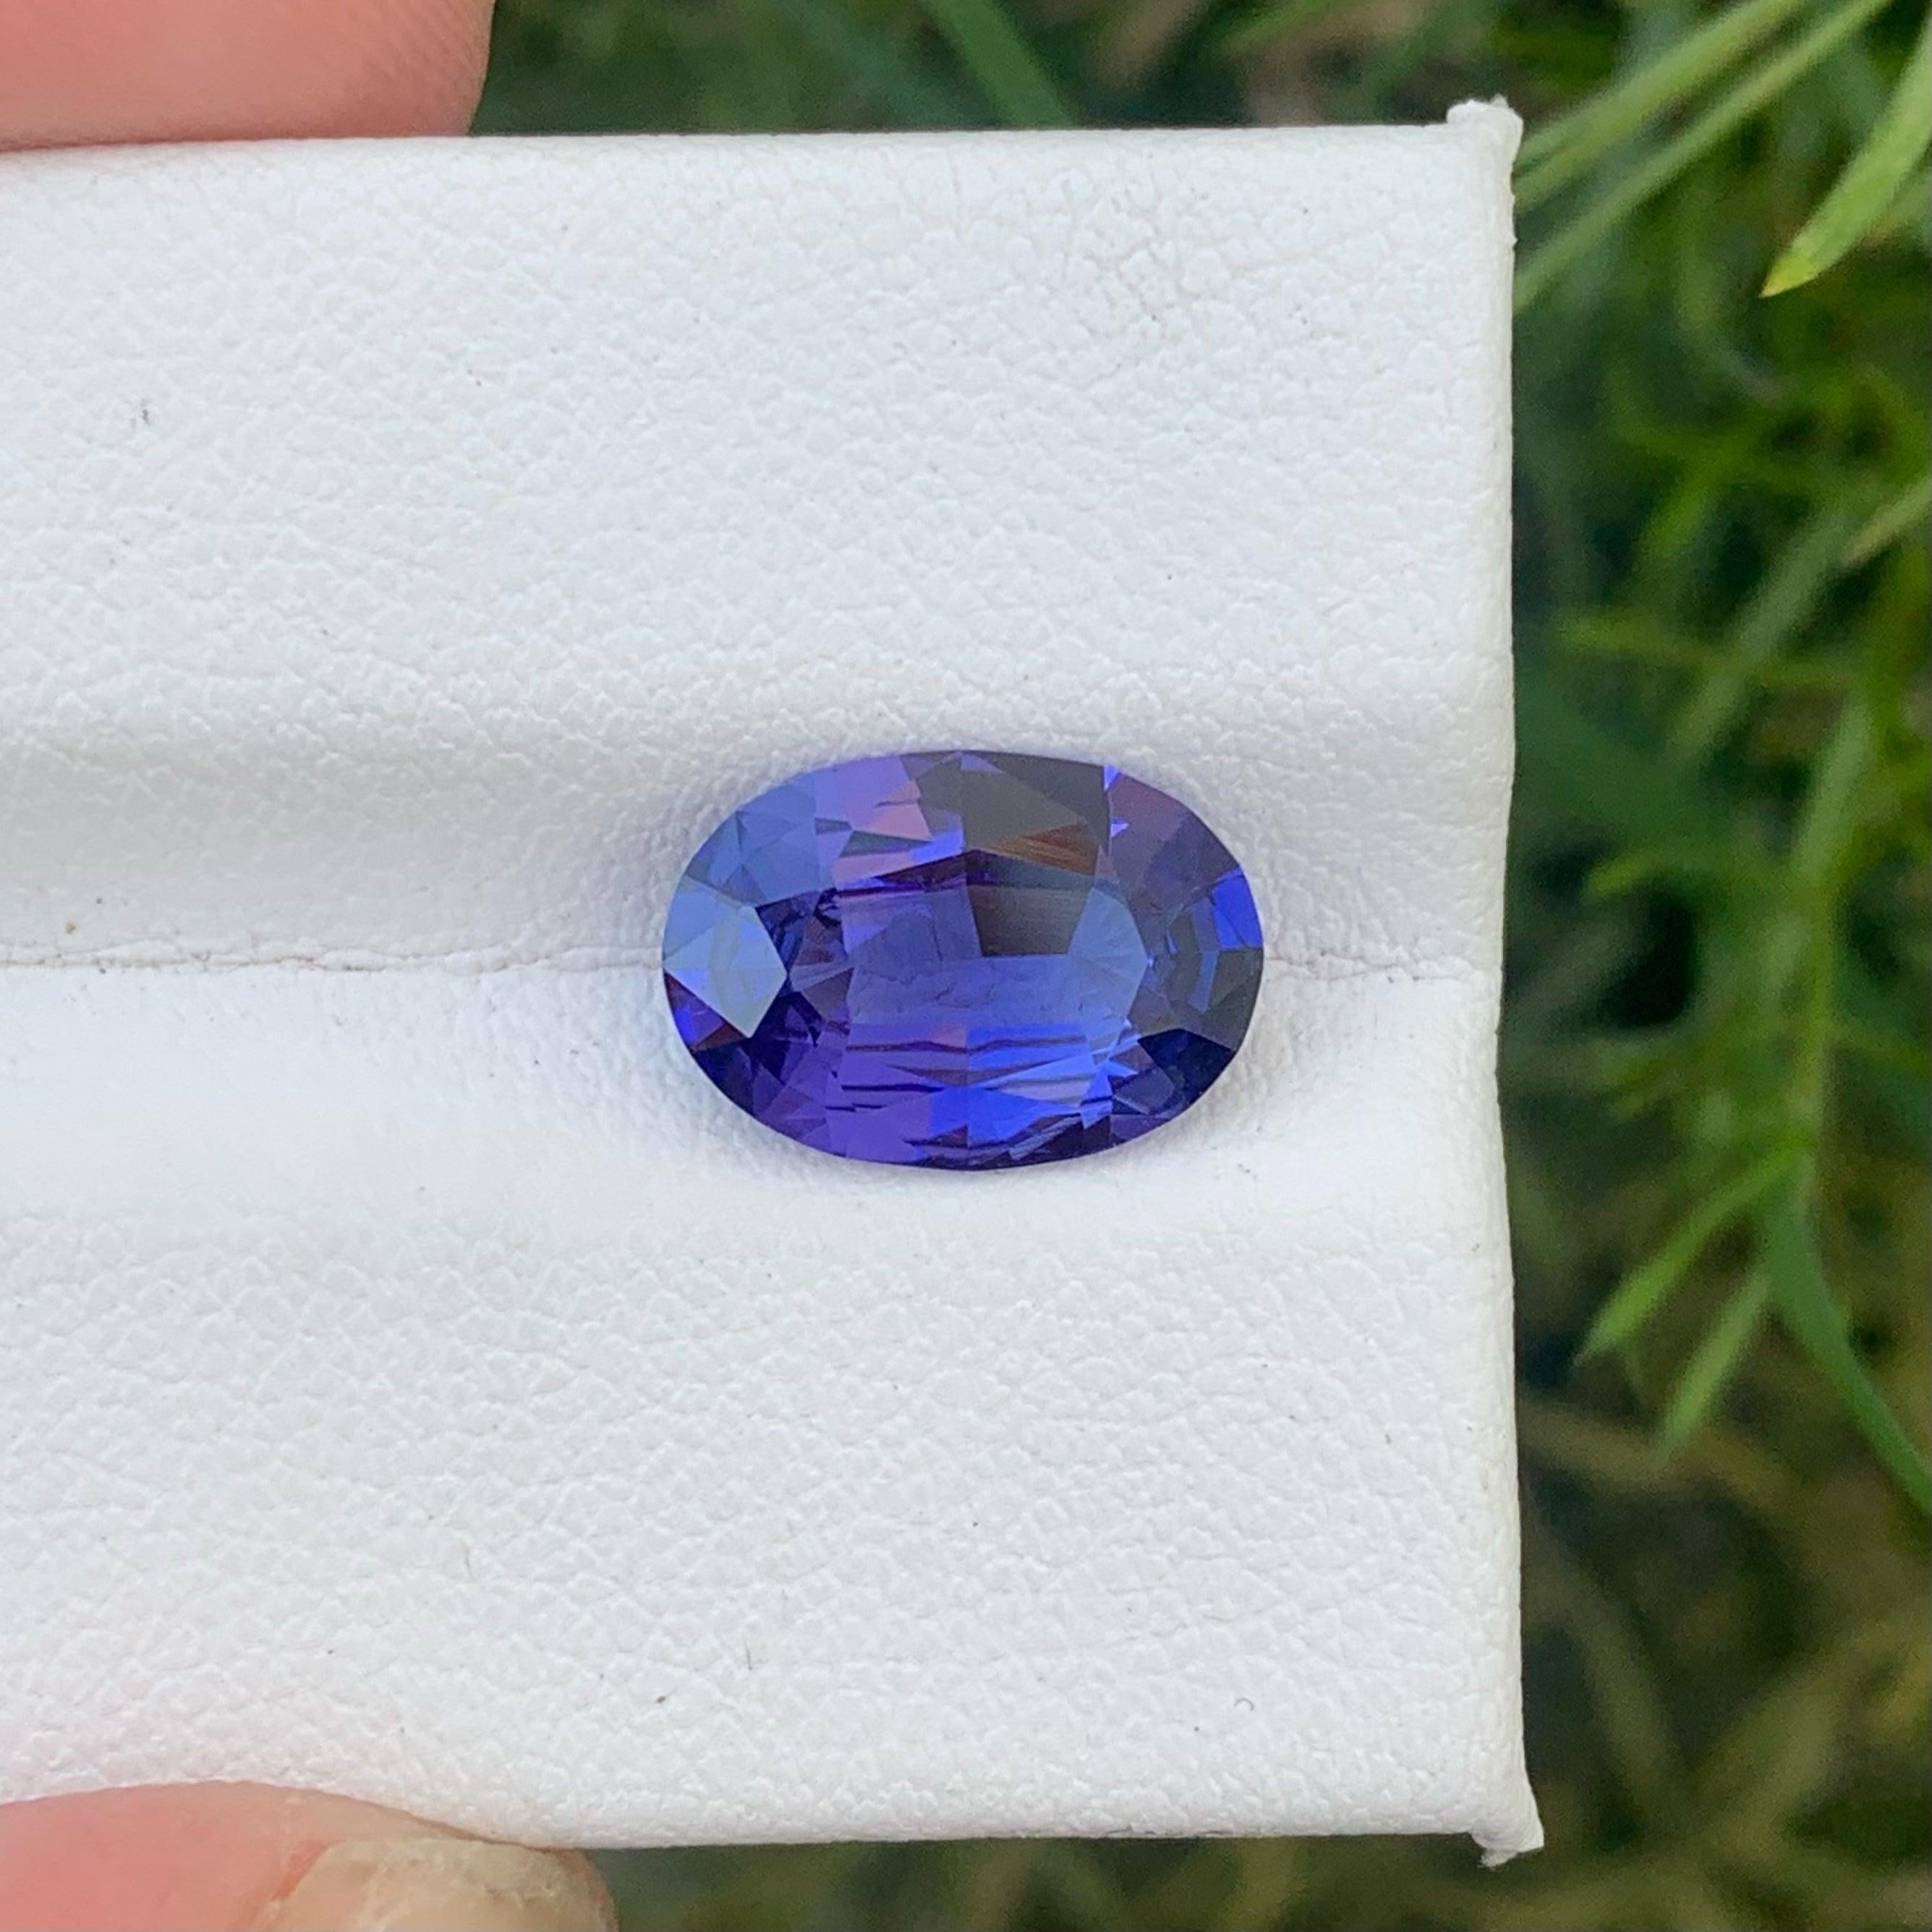 Exquisite Natural Blue Tanzanite Gemstone, Available For Sale At Wholesale Price Natural High Quality 2.80 Carats Loupe Clean Clarity Loose Tanzanite Stone From Tanzania.

Product Information:
GEMSTONE TYPE:	Exquisite Natural Blue Tanzanite